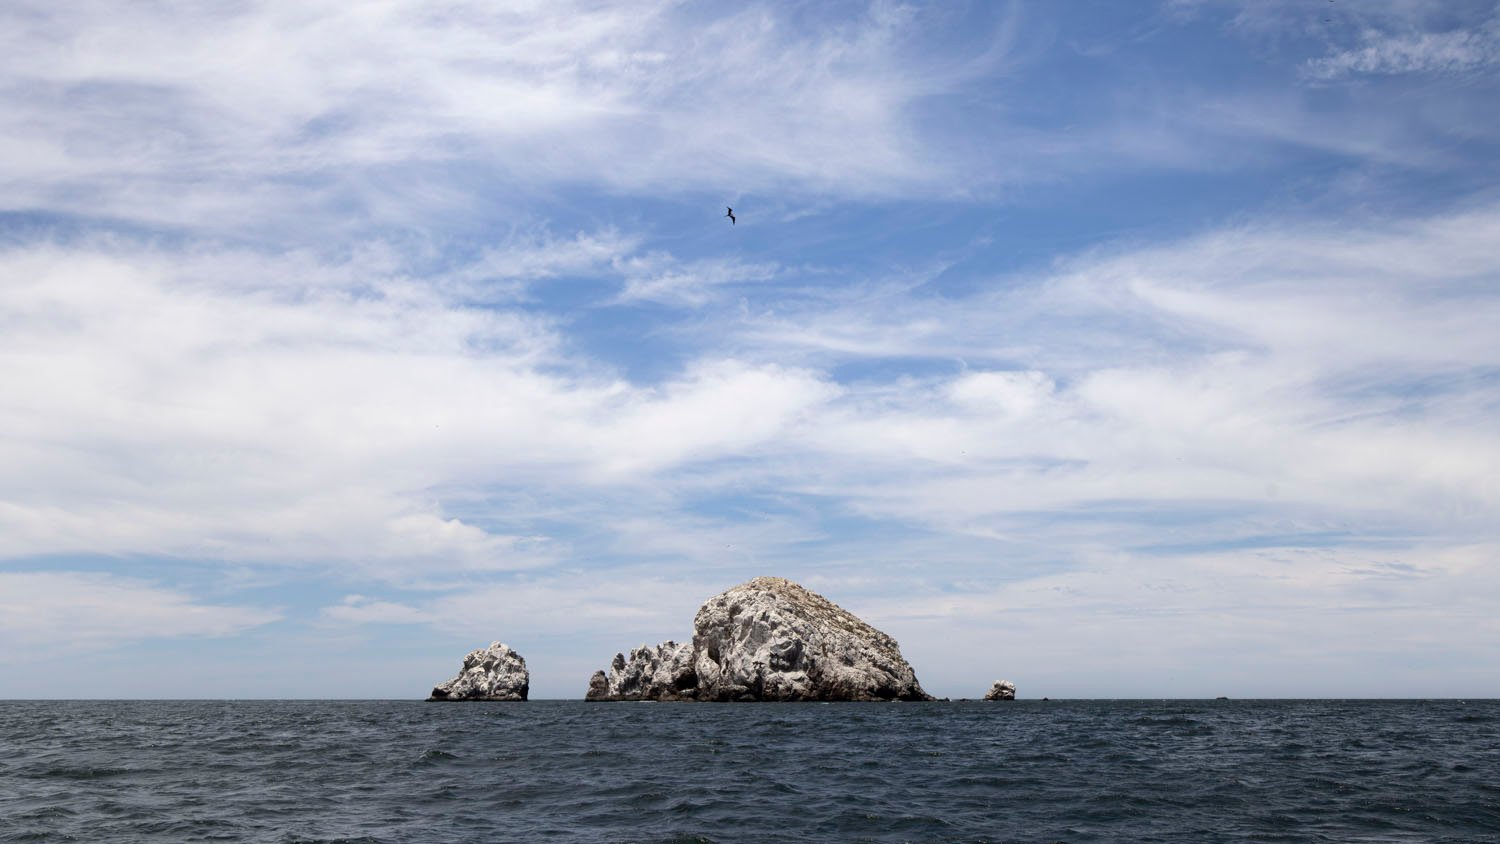 Under a cloudy sky, a large craggy rock formation is surrounded by a slightly choppy sea, and a bird flies high.